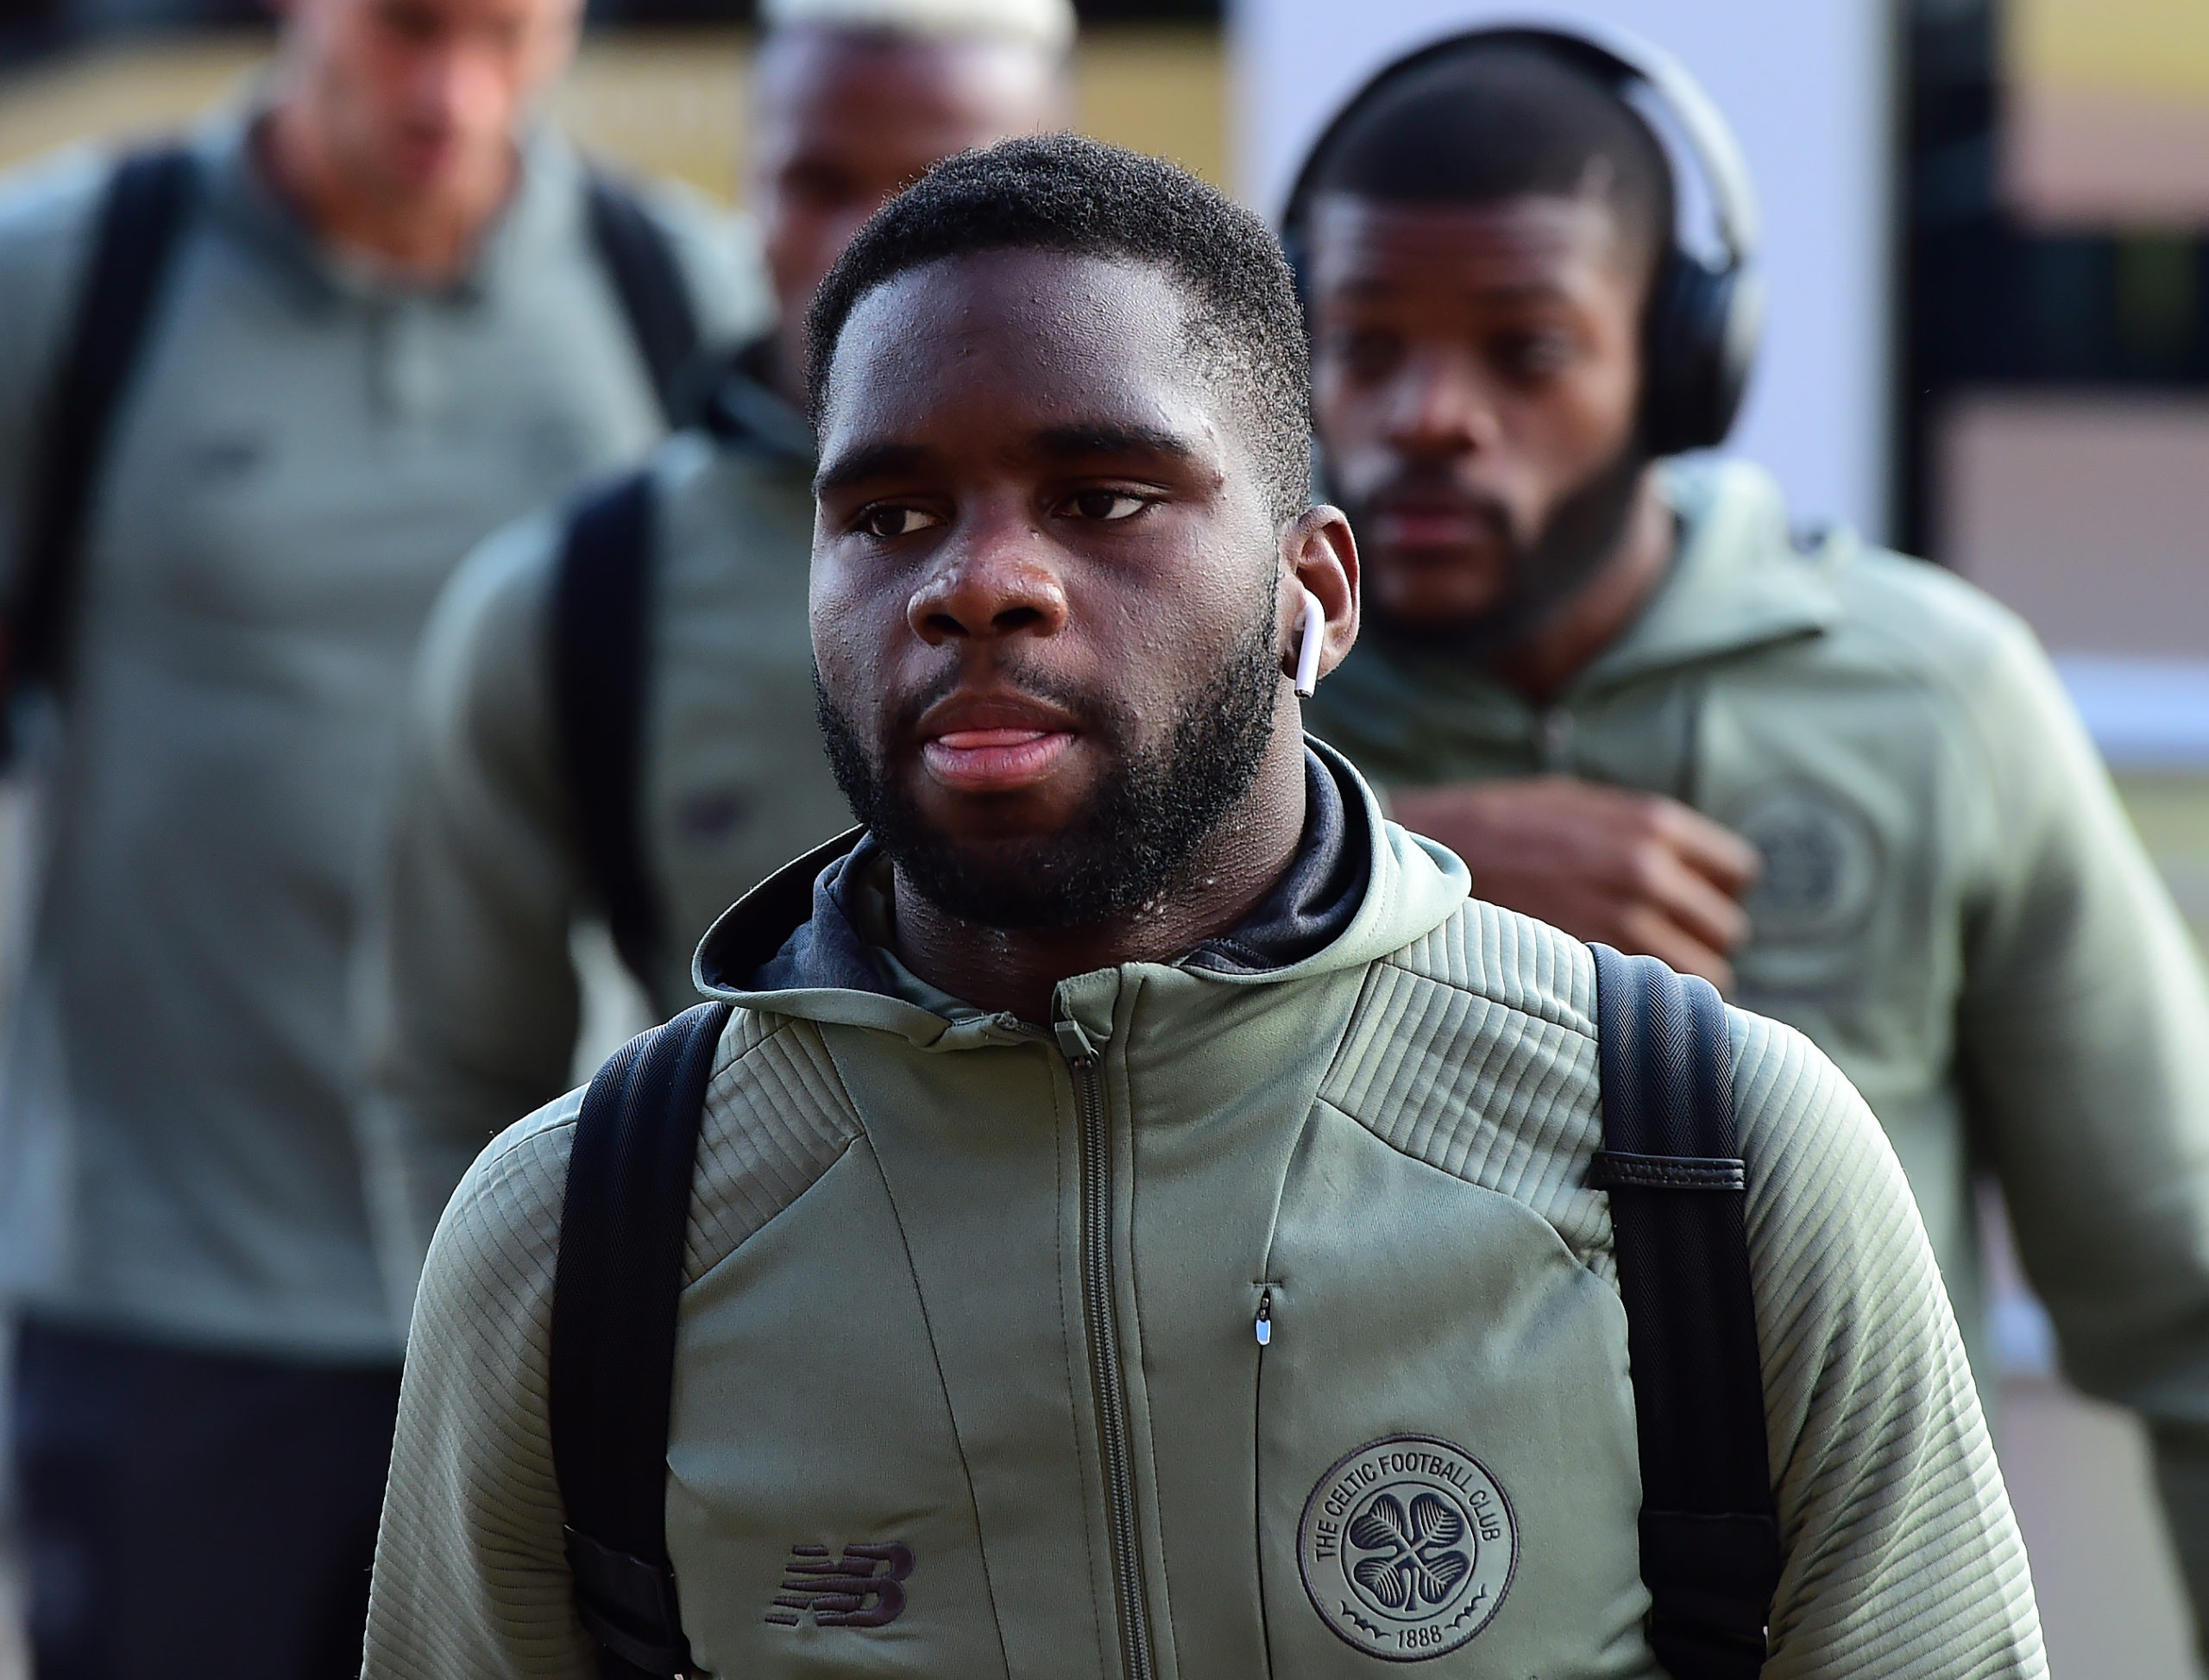 STV journalist says Celtic's Odsonne Edouard able to return to Scotland on October 16th; doubtful for Rangers clash